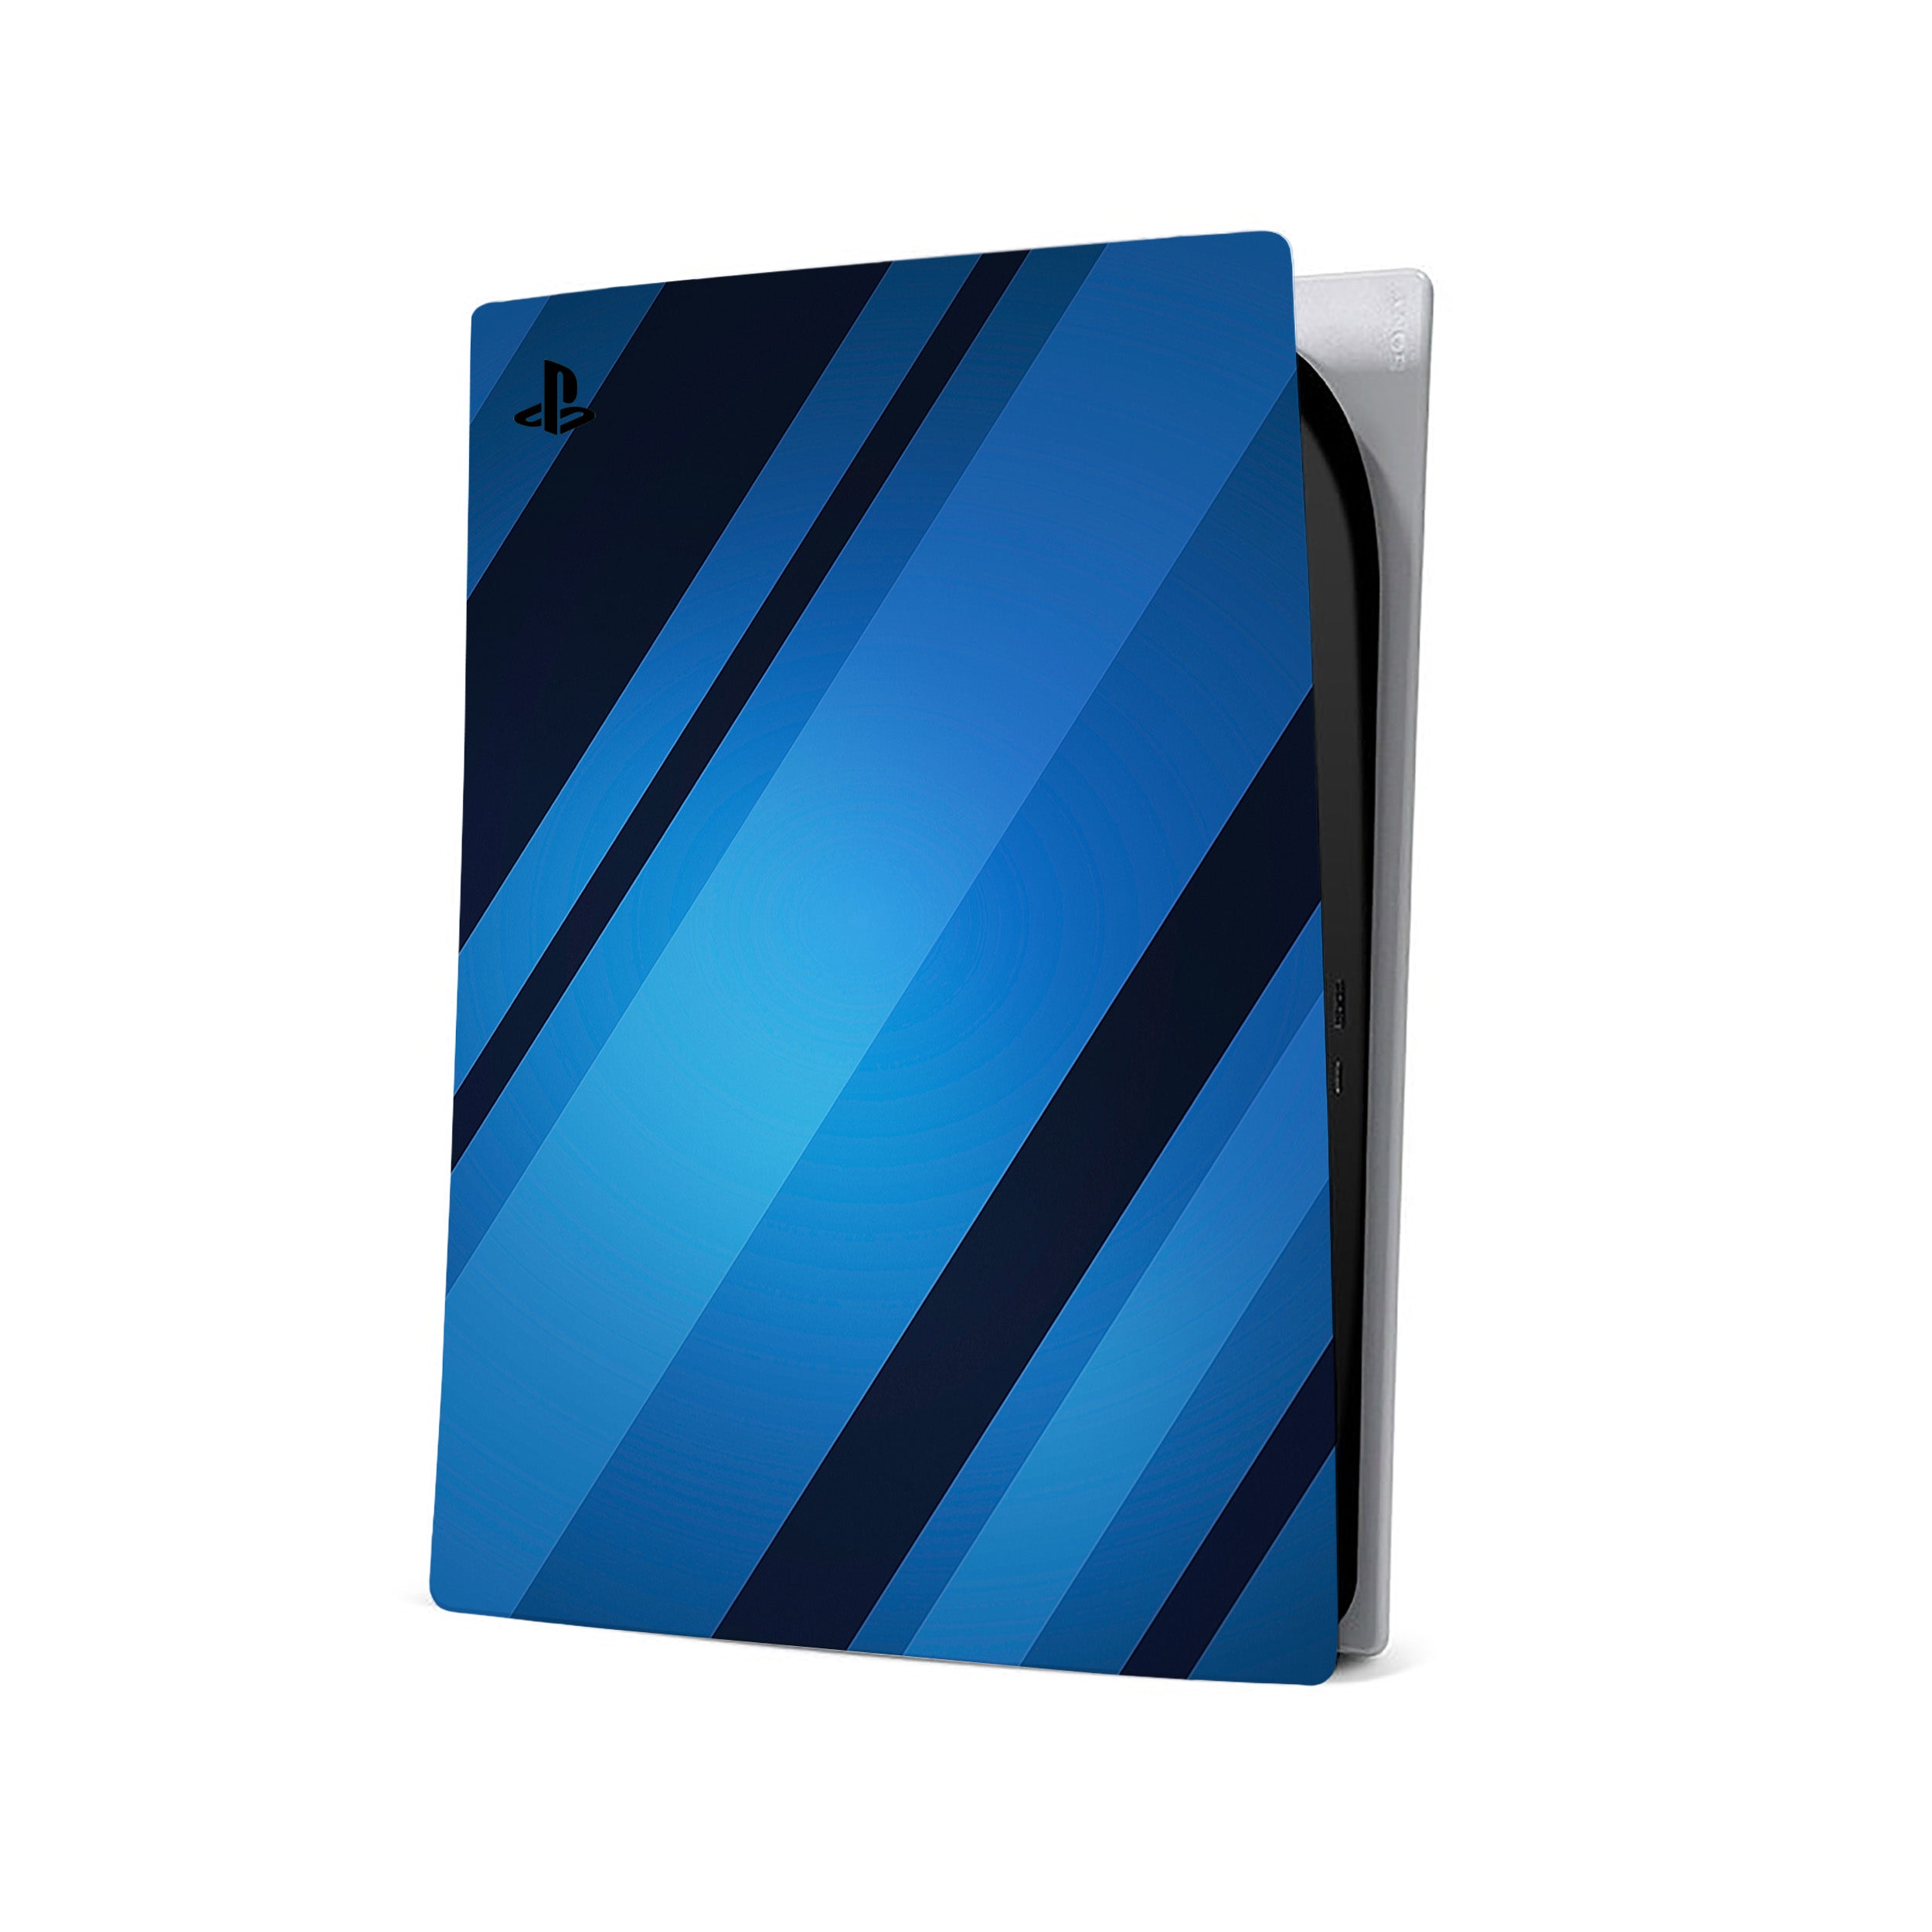 A video game skin featuring a Blue Streaks design for the PS5.